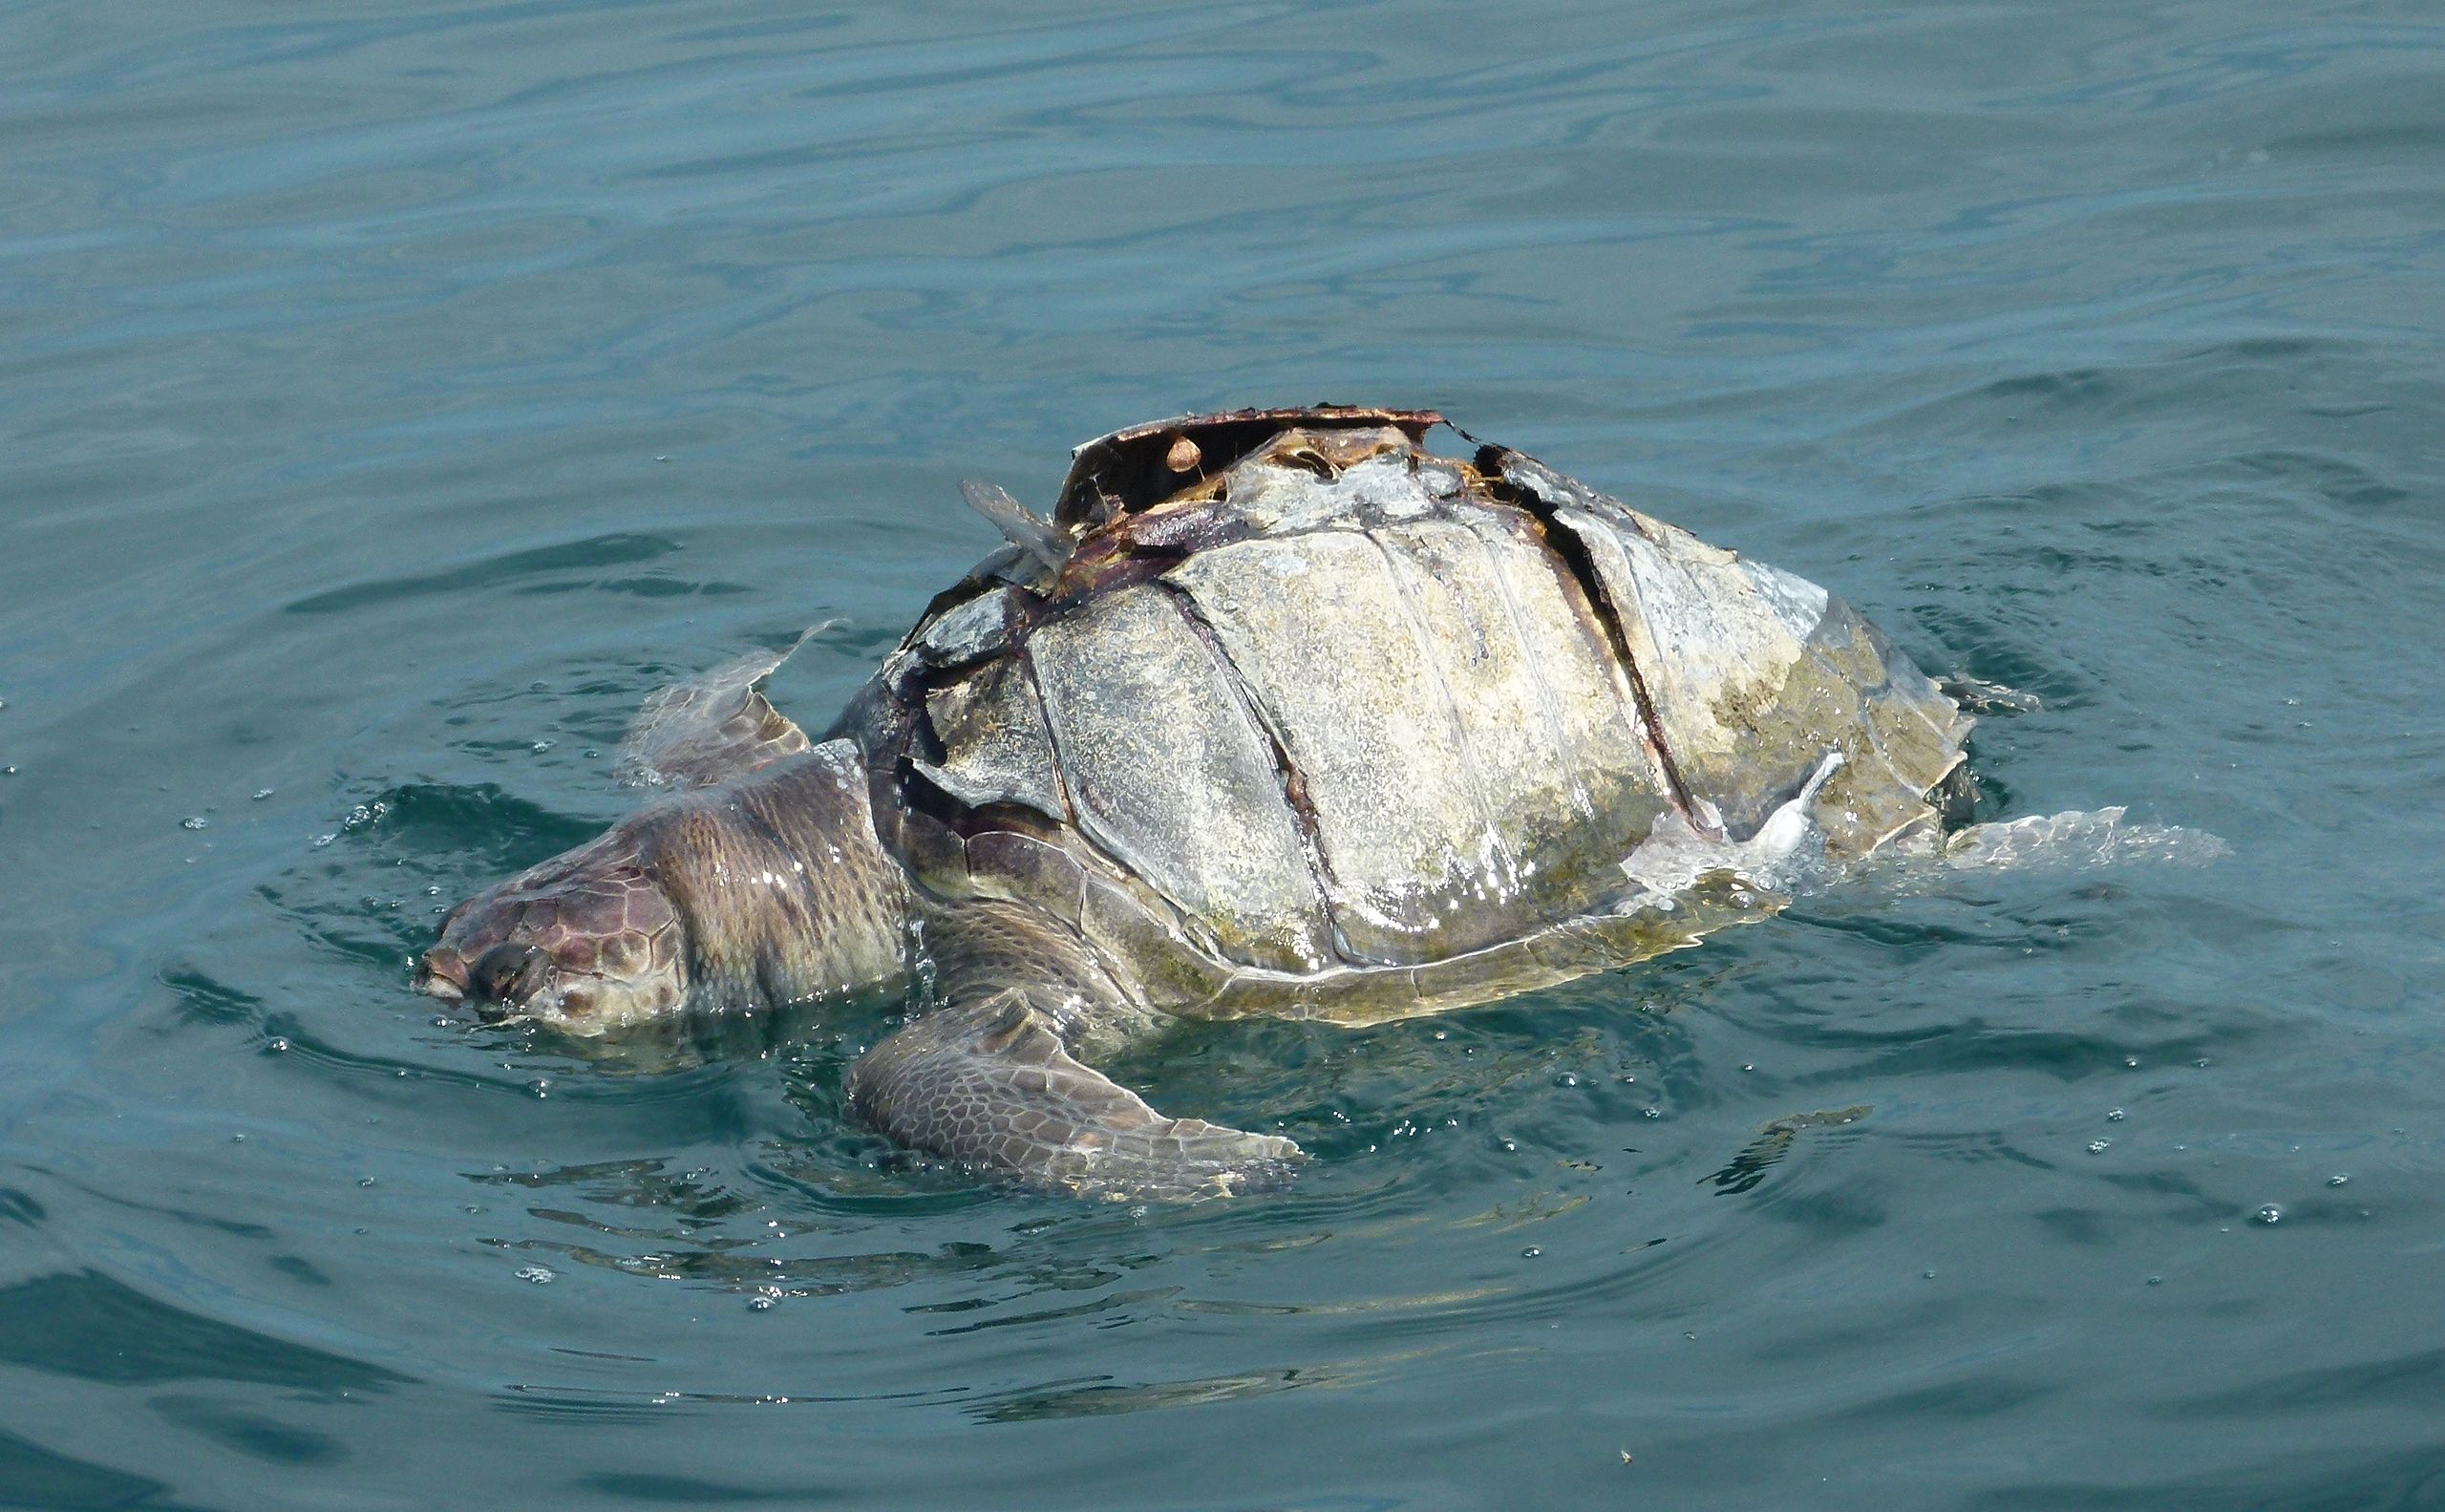 Olive ridley sea turtle killed by boat blades.